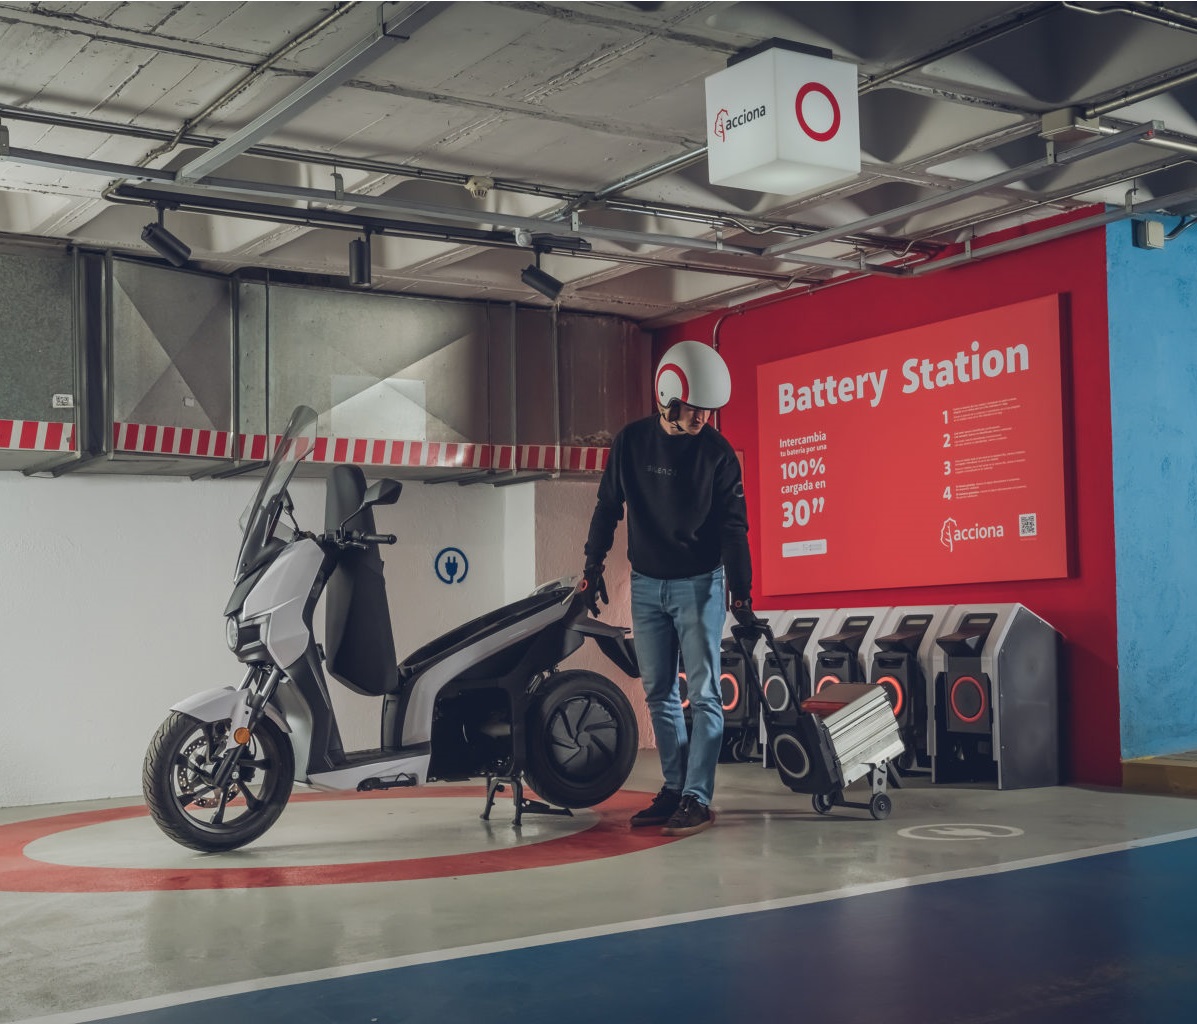 Battery stations, a reality in the BSM Car Parks